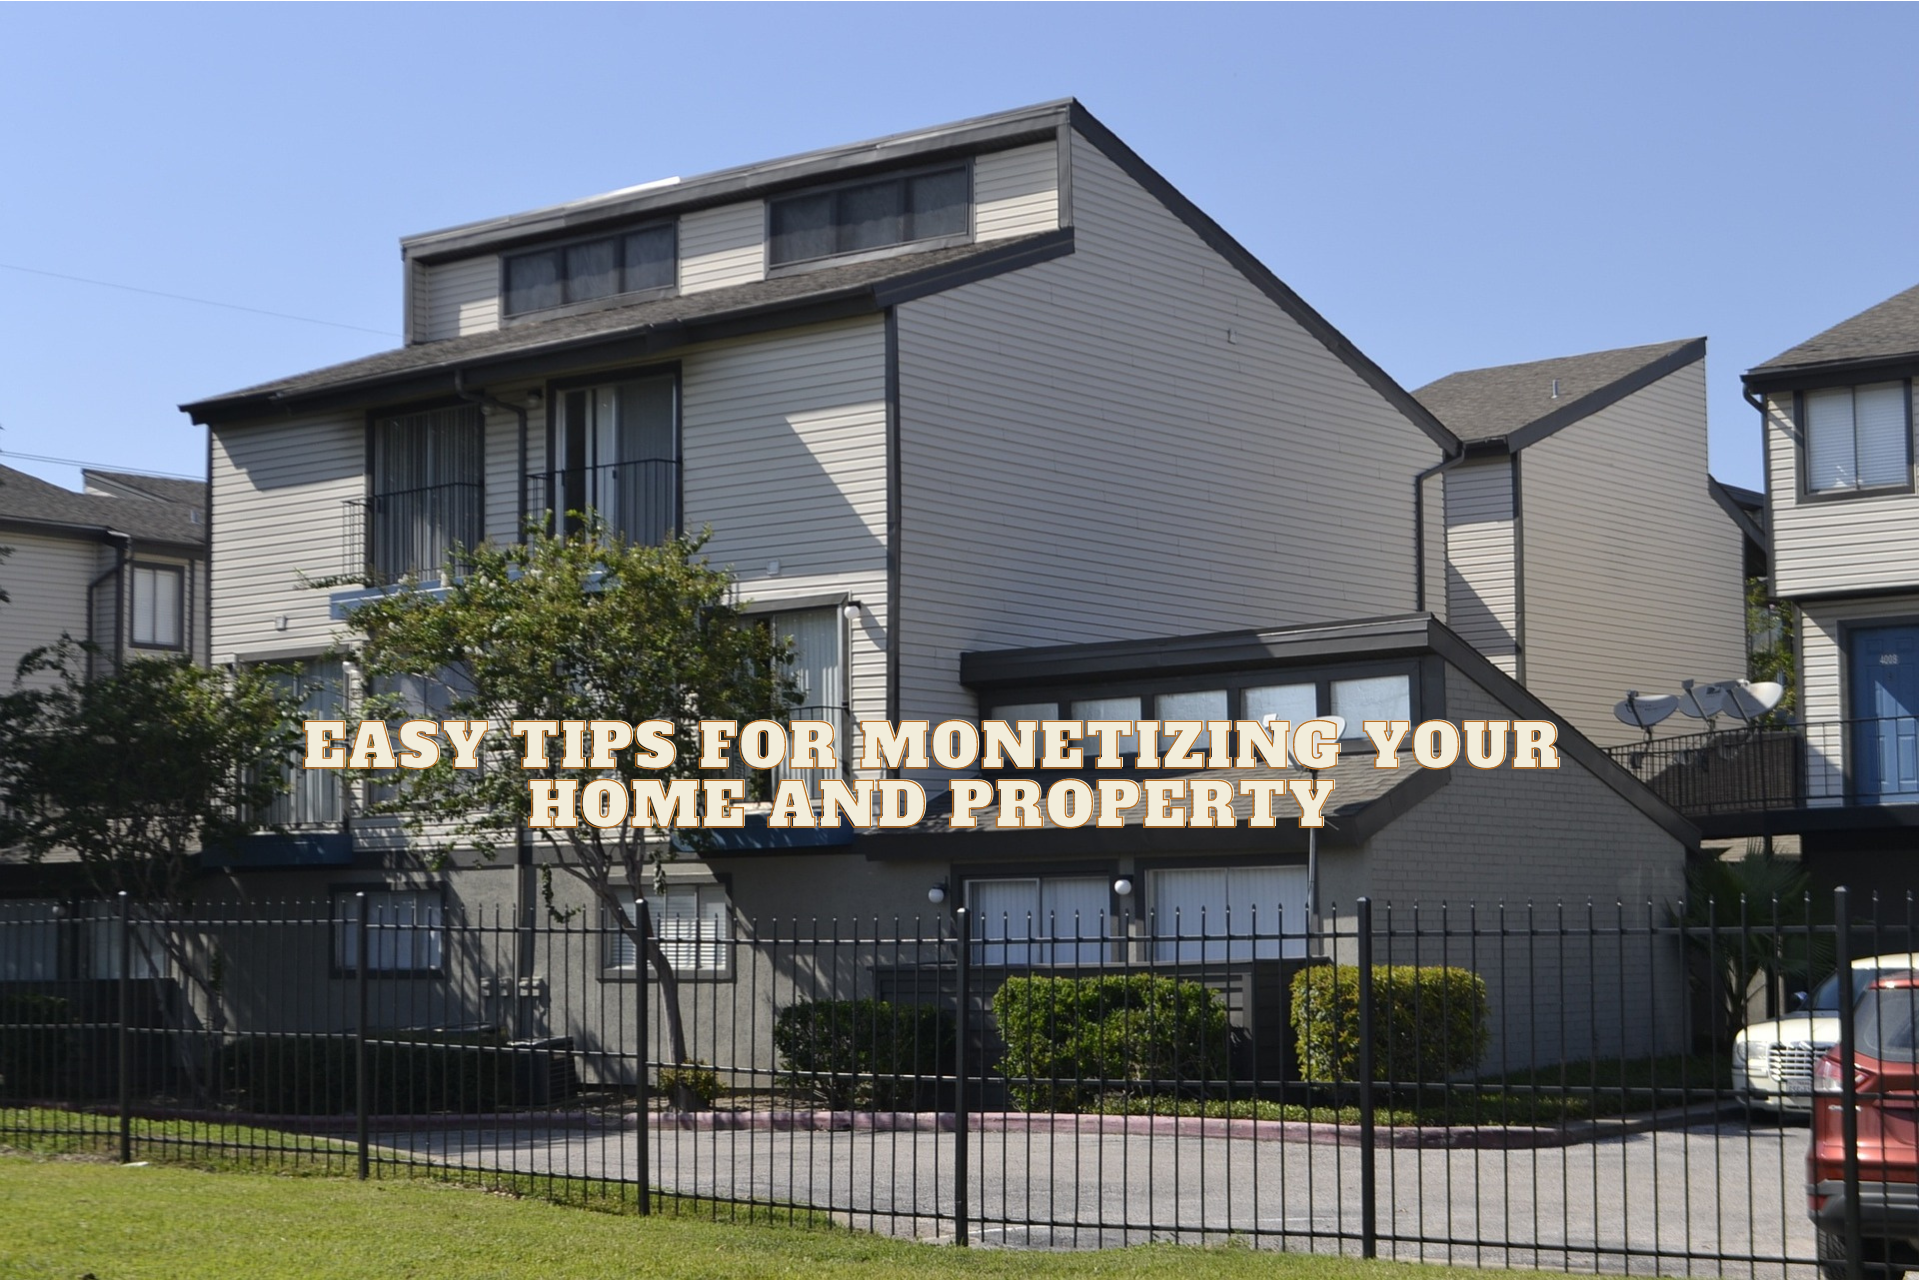 Easy Tips for Monetizing Your Home and Property